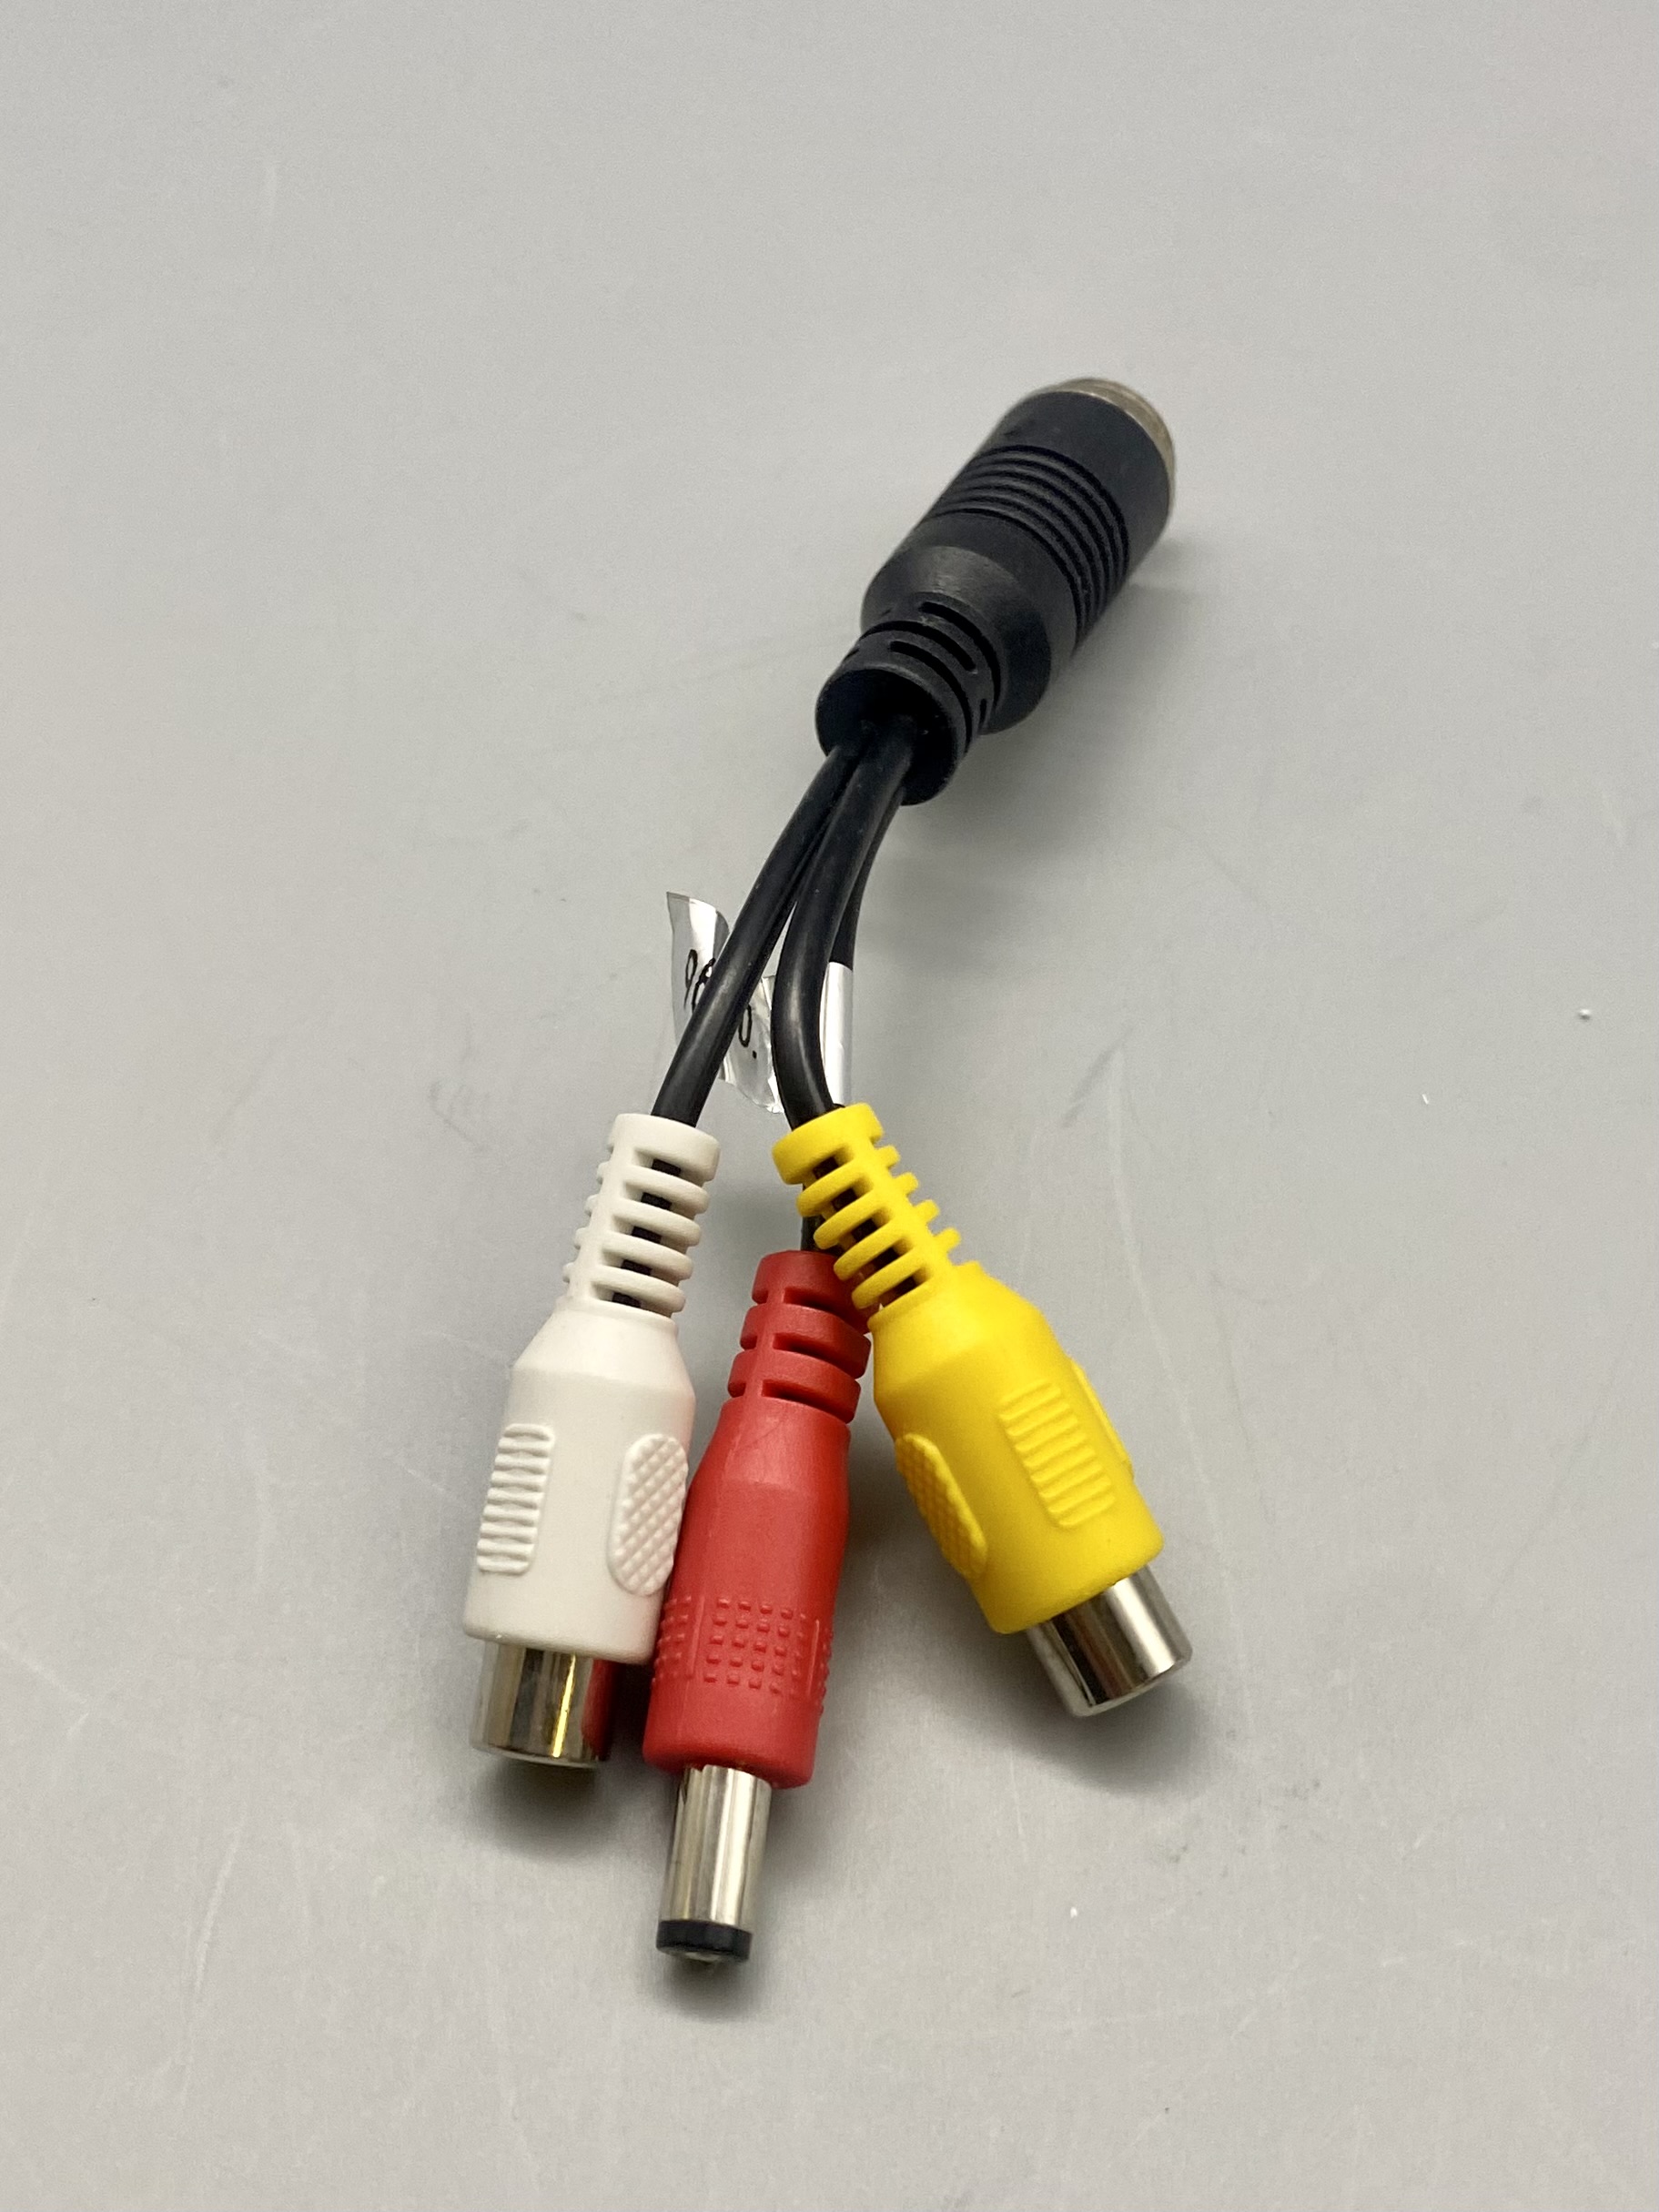 Adapter to Allow RCA A/V to connect in place of RVS Camera